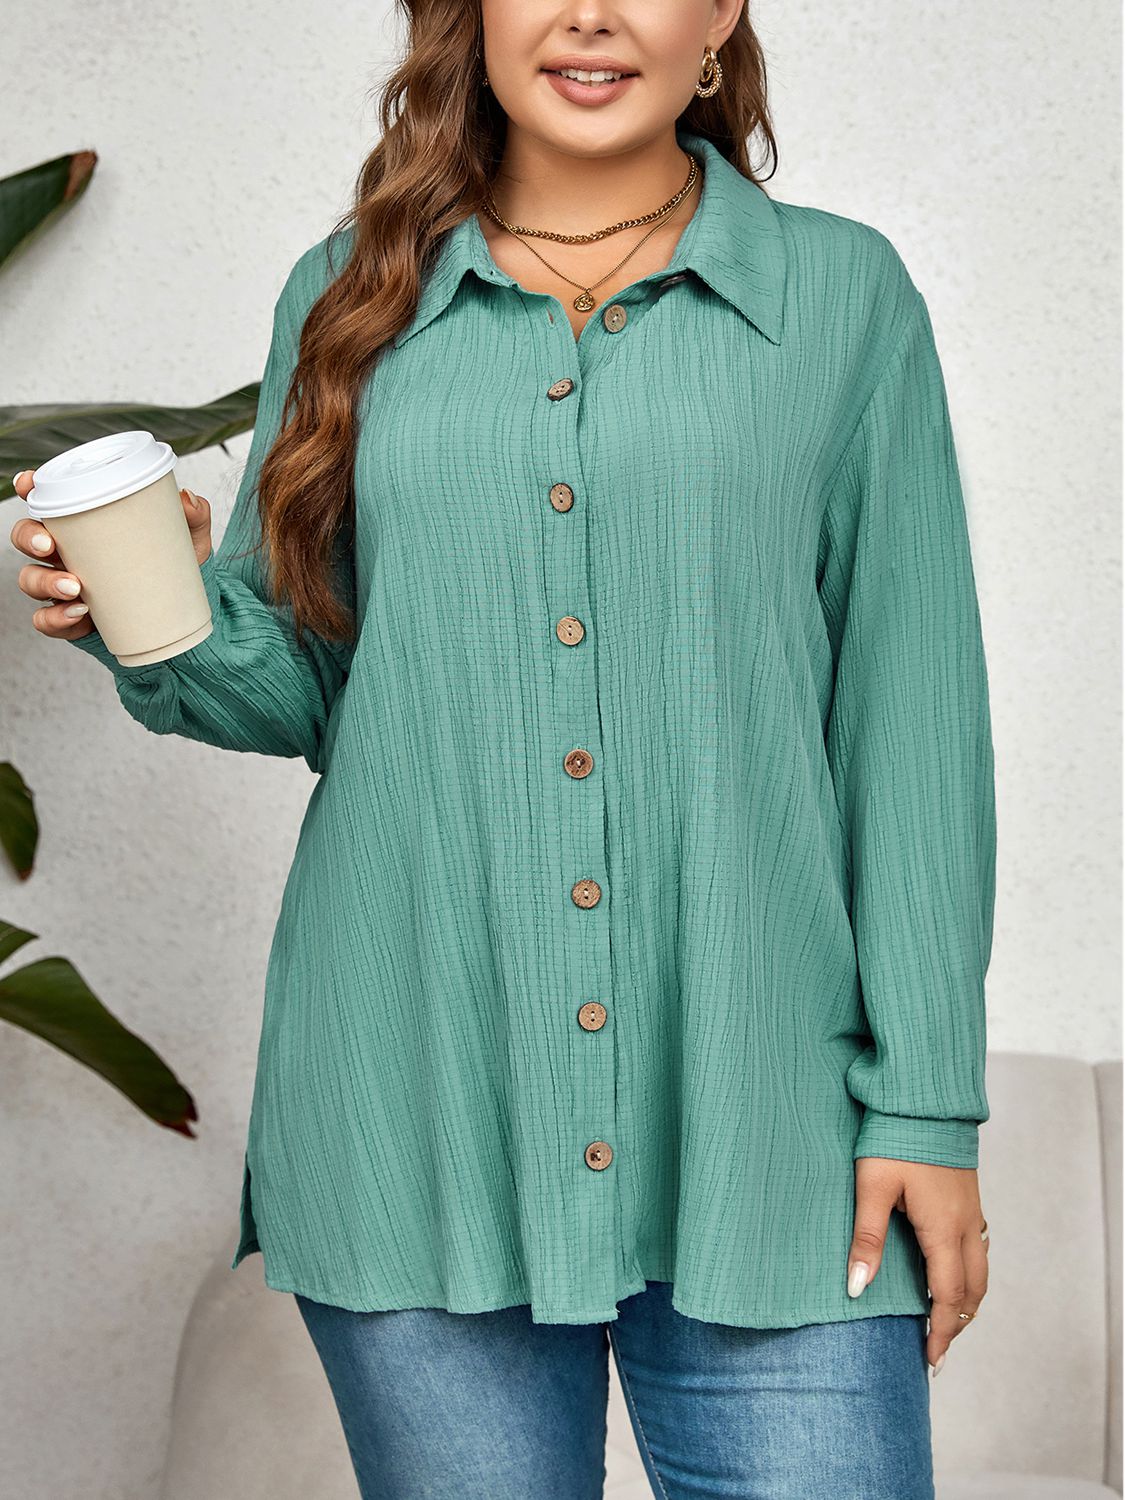 Plus Size Collared Neck Long Sleeve Shirt  Krazy Heart Designs Boutique Turquoise 1XL 